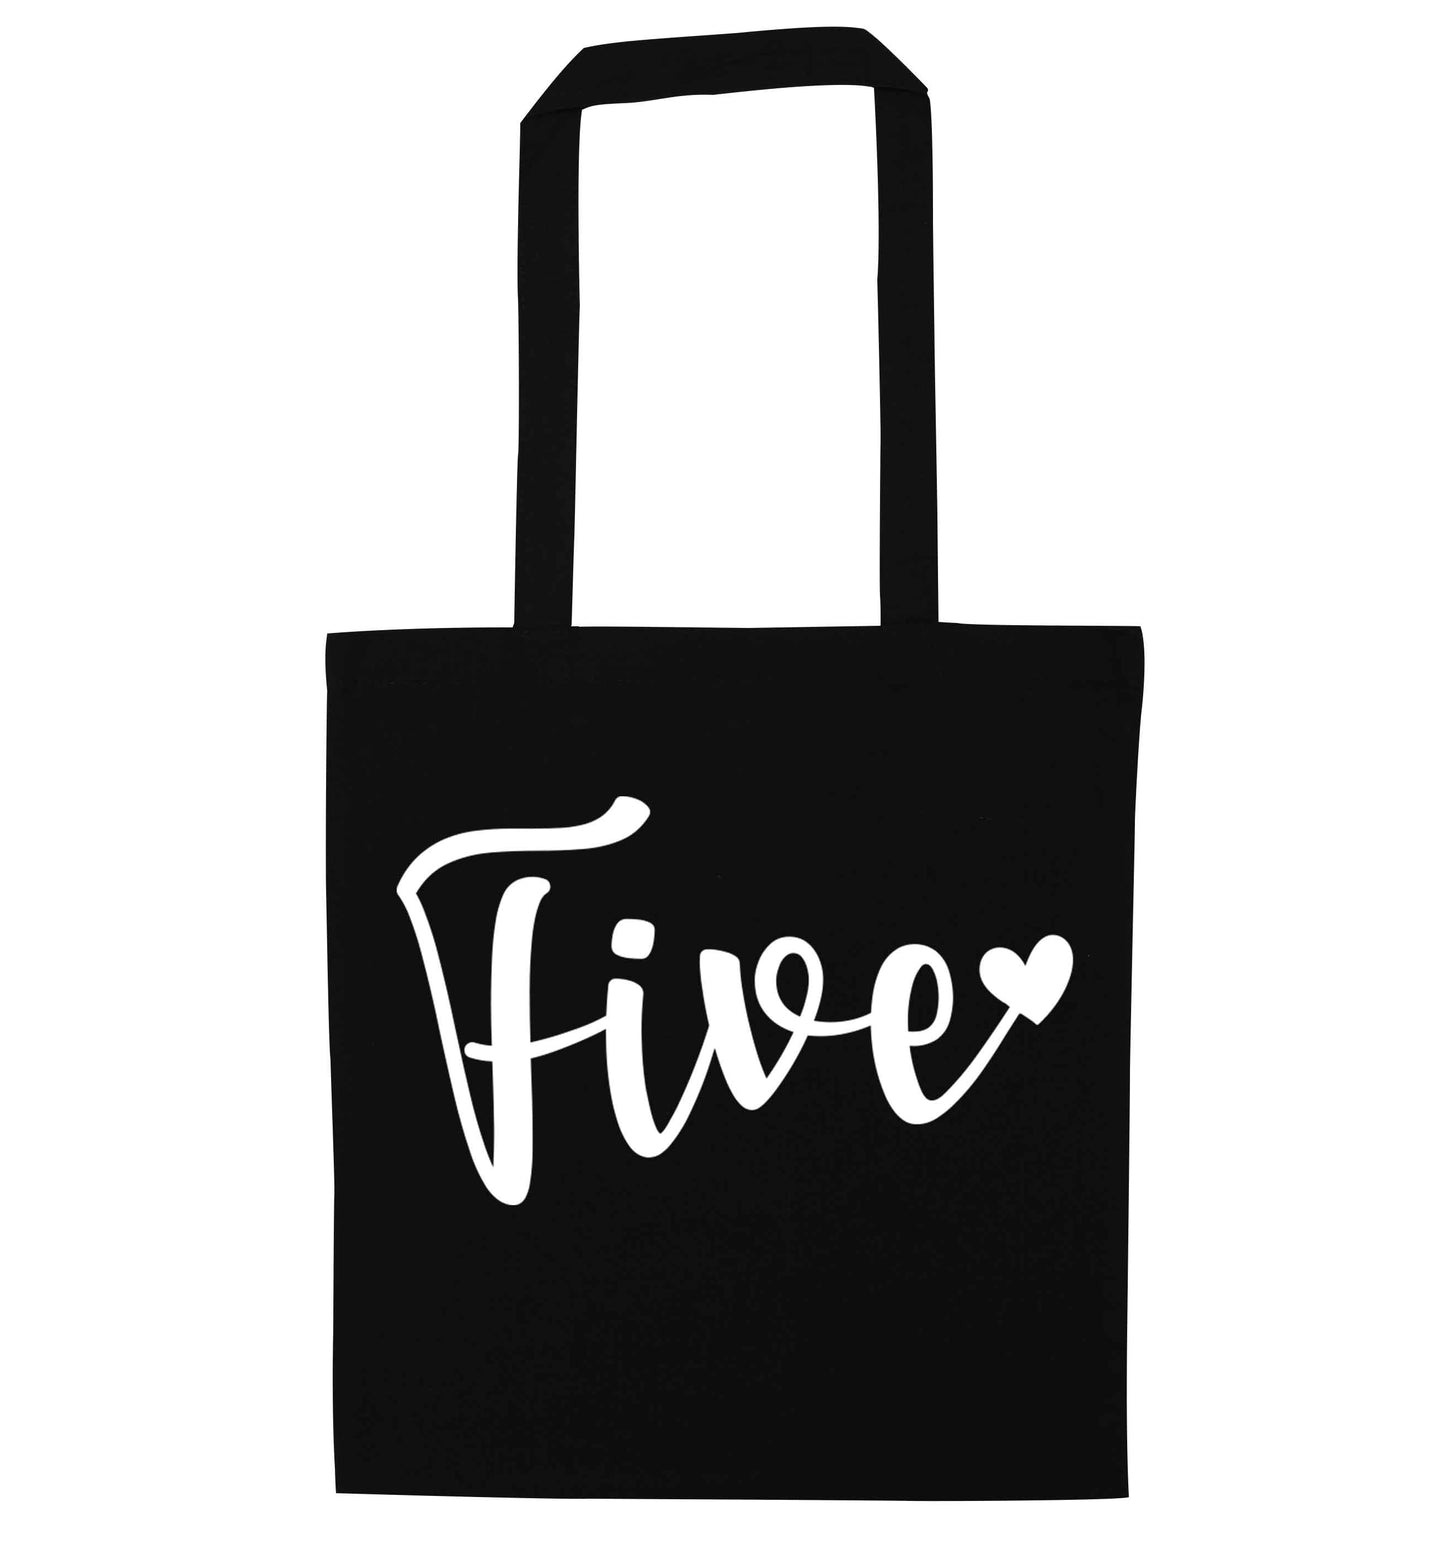 Five and heart black tote bag